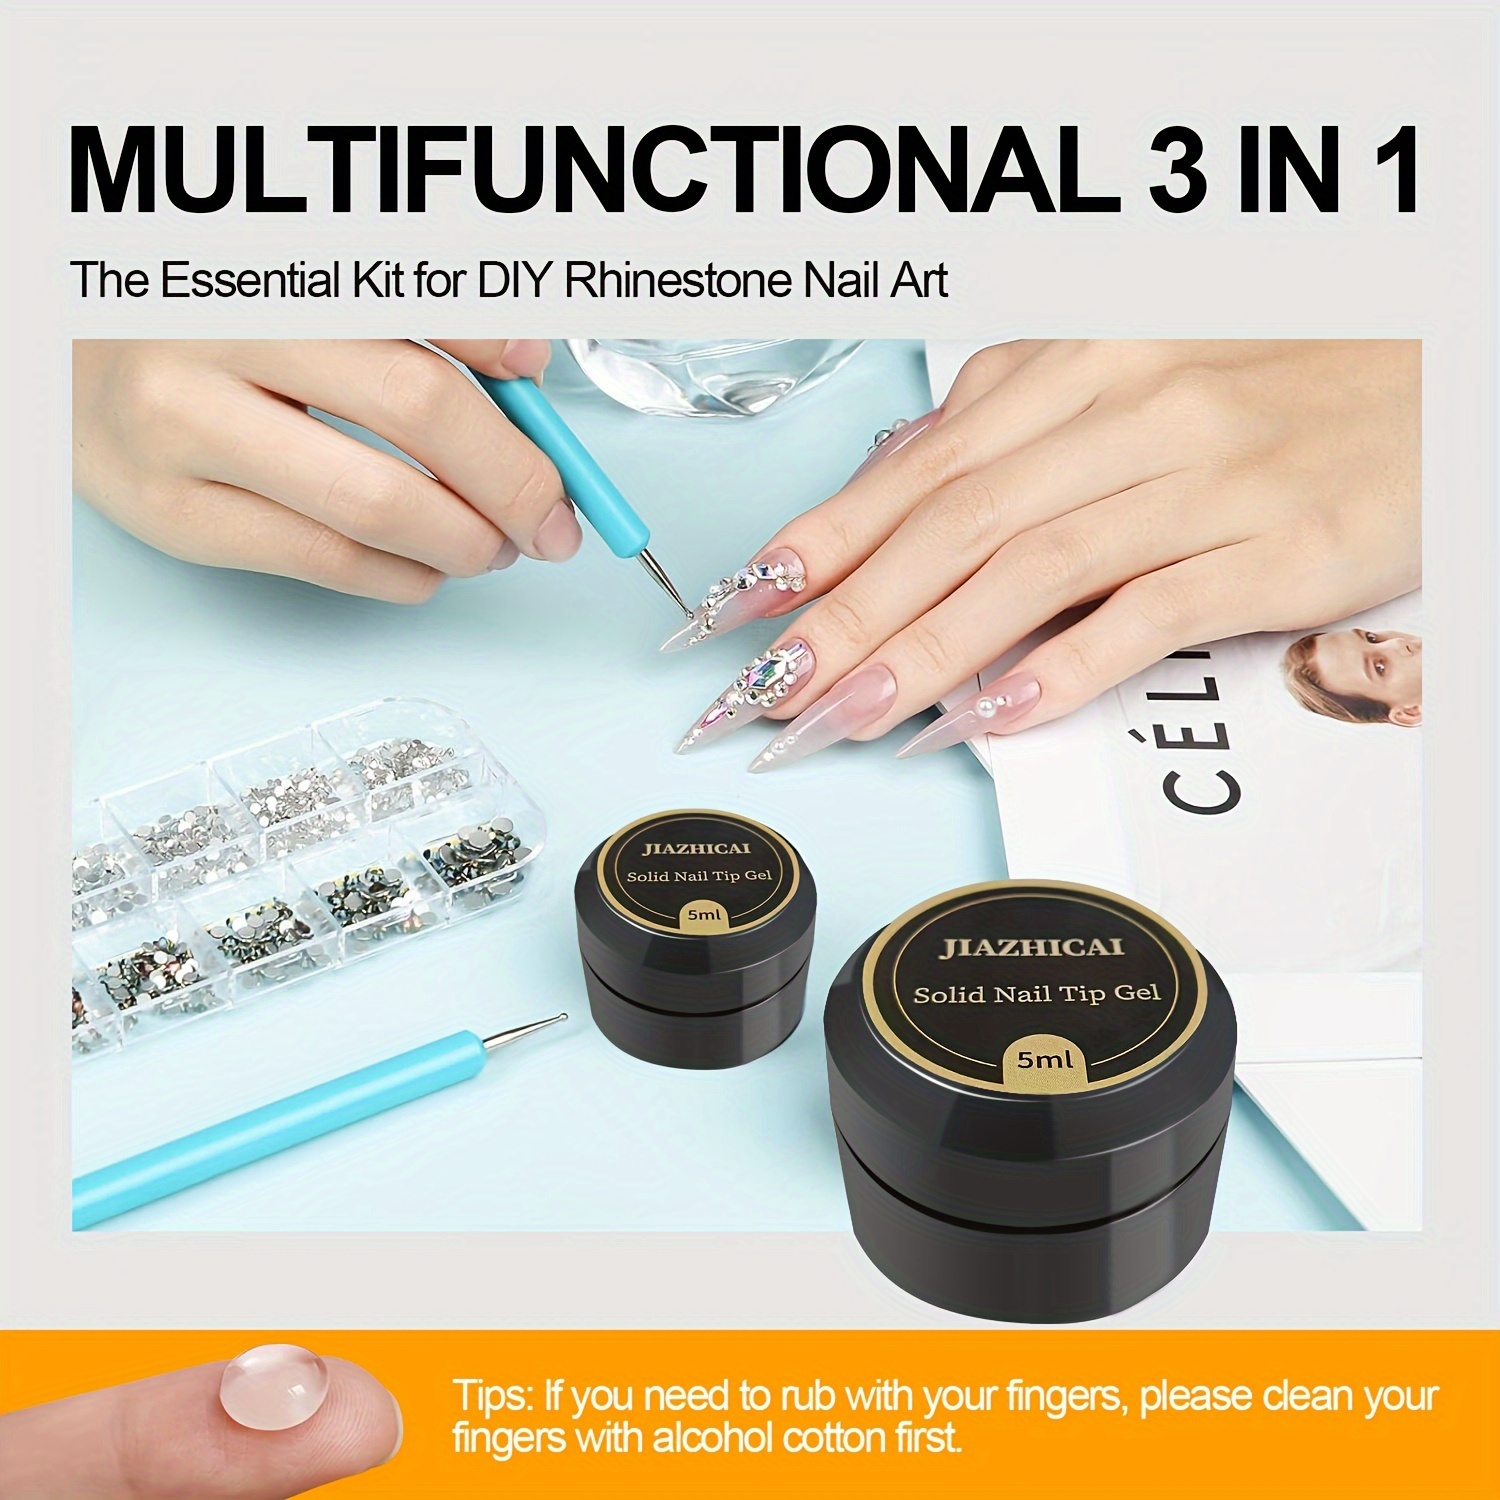 0.71oz/1pc Nail Extension Nail Rhinestone Glue For Nails, Super Strong Gel  Nail Glue For Rhinestones And 3d Nails Builder Gel For New Year Decoration  Rhinestone Nail Art - Beauty & Health 